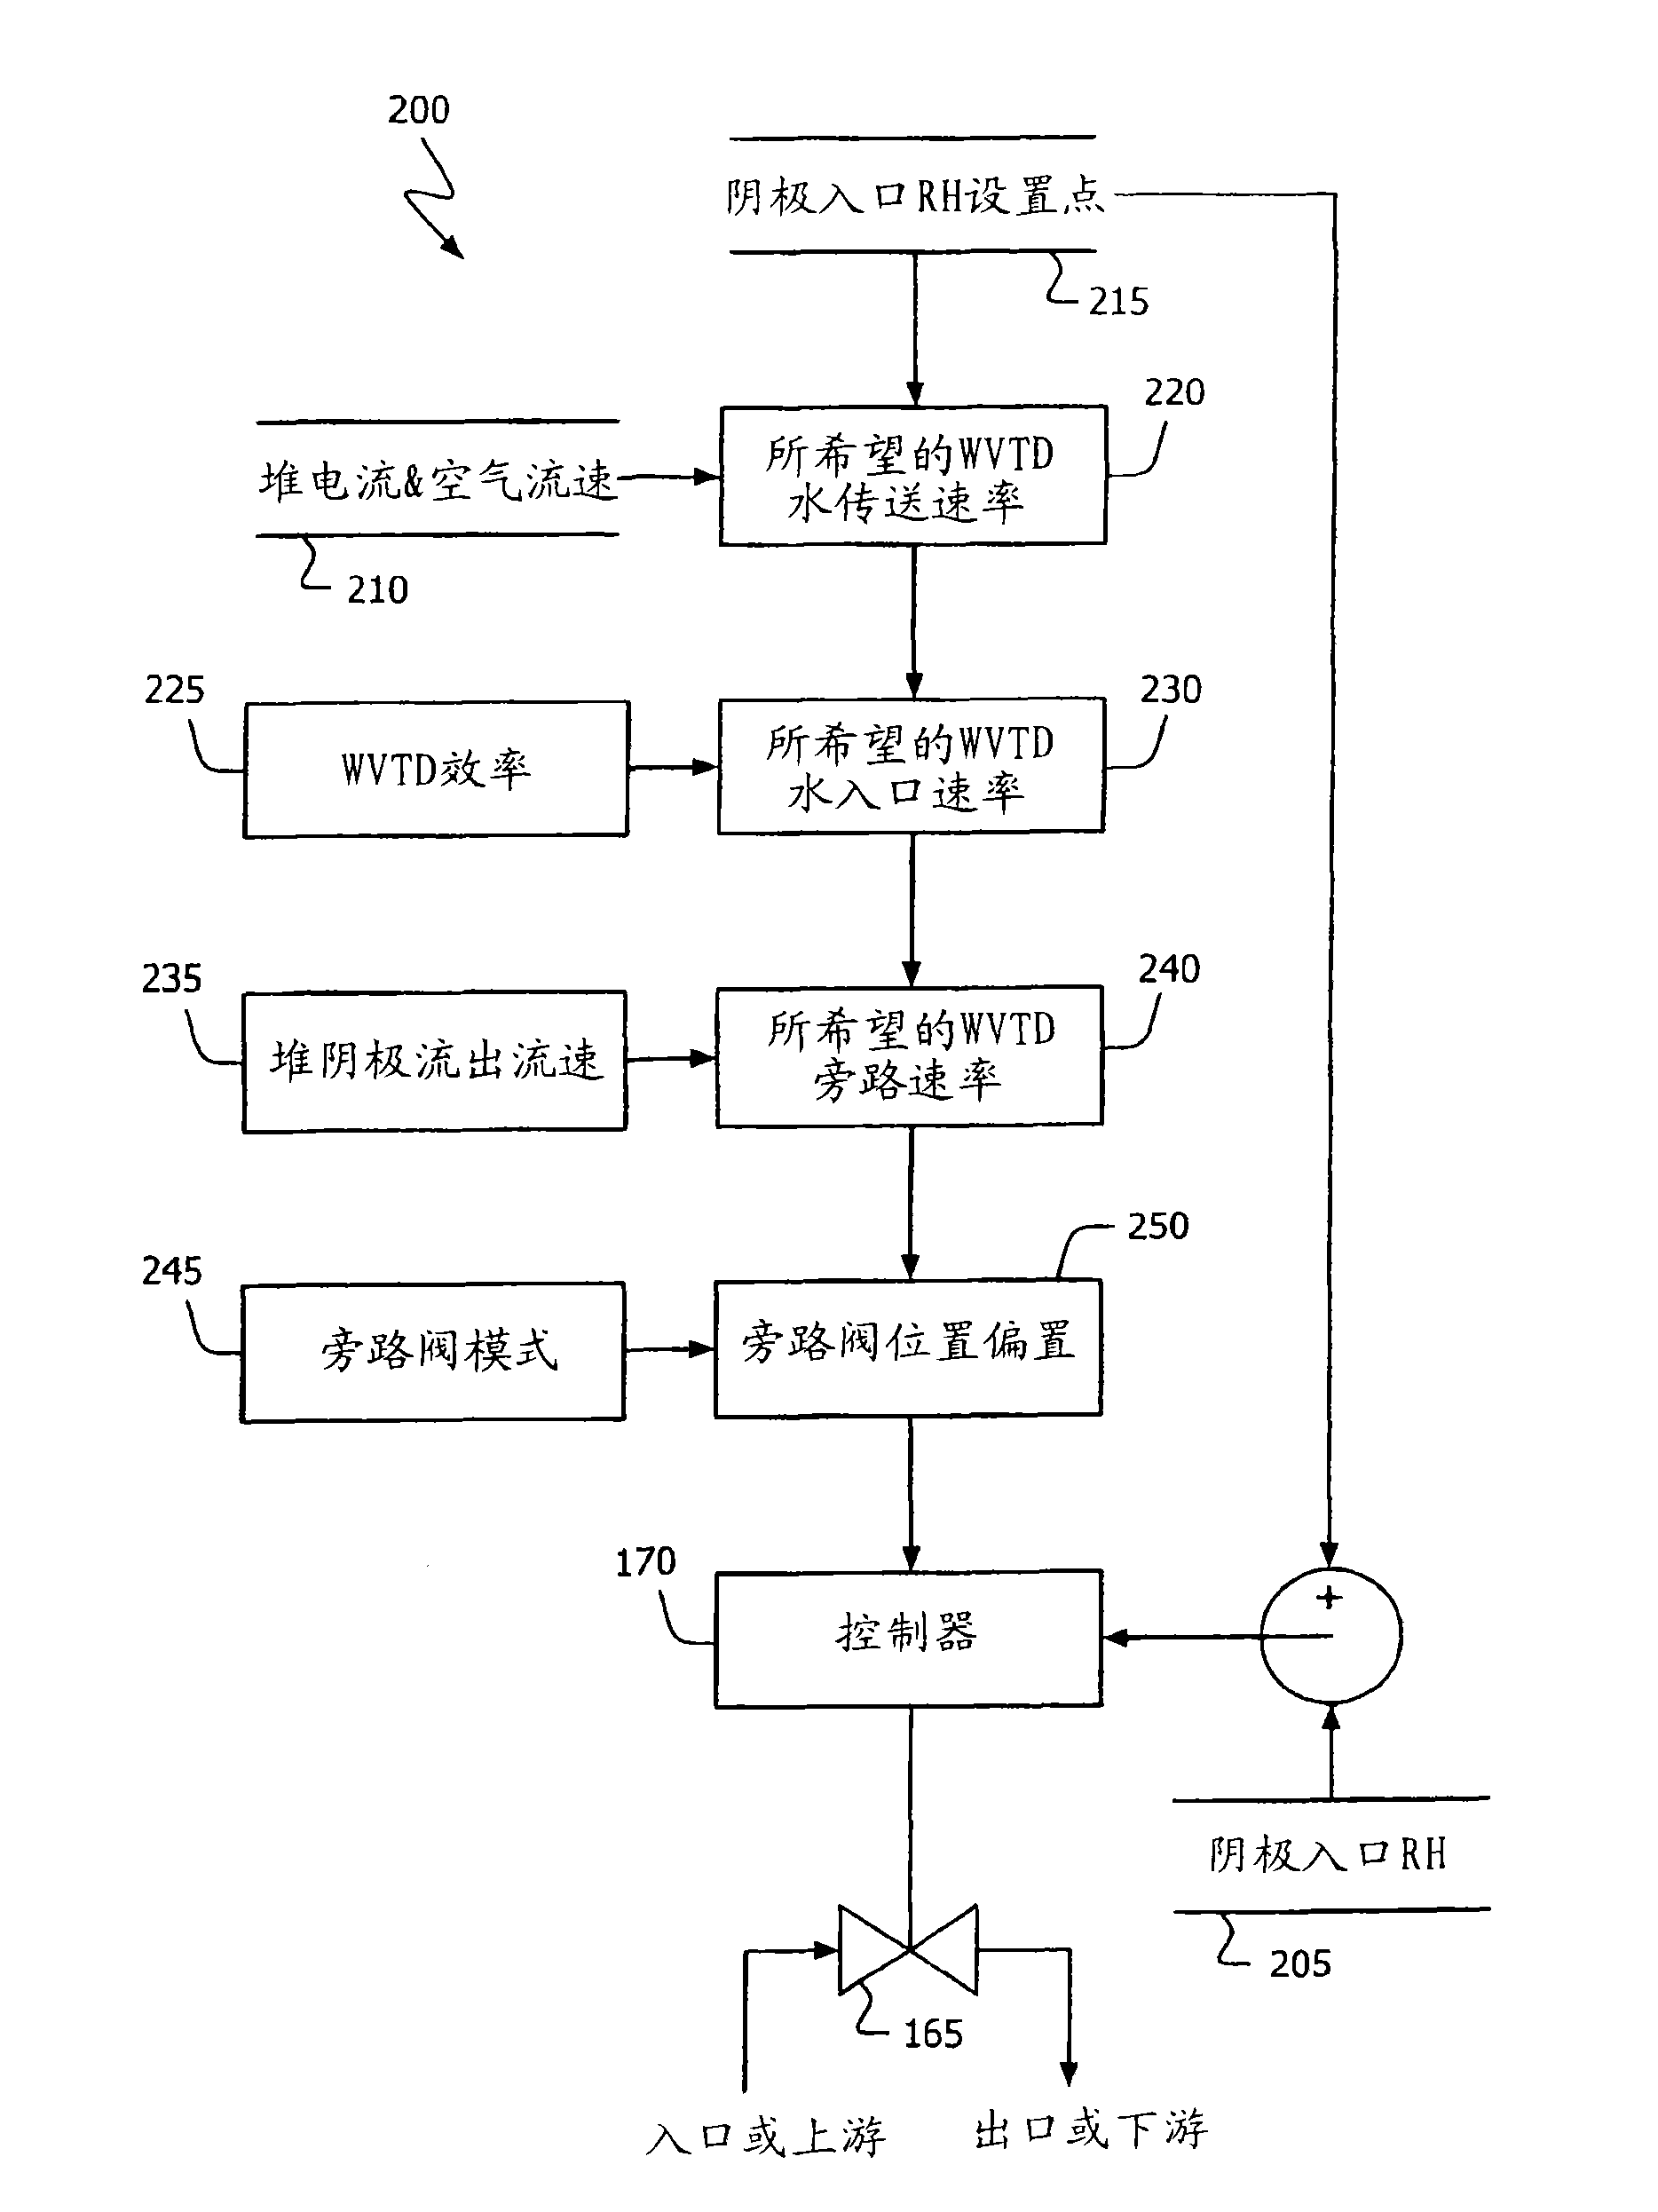 Fuel cell system cathode inlet relative humidity control